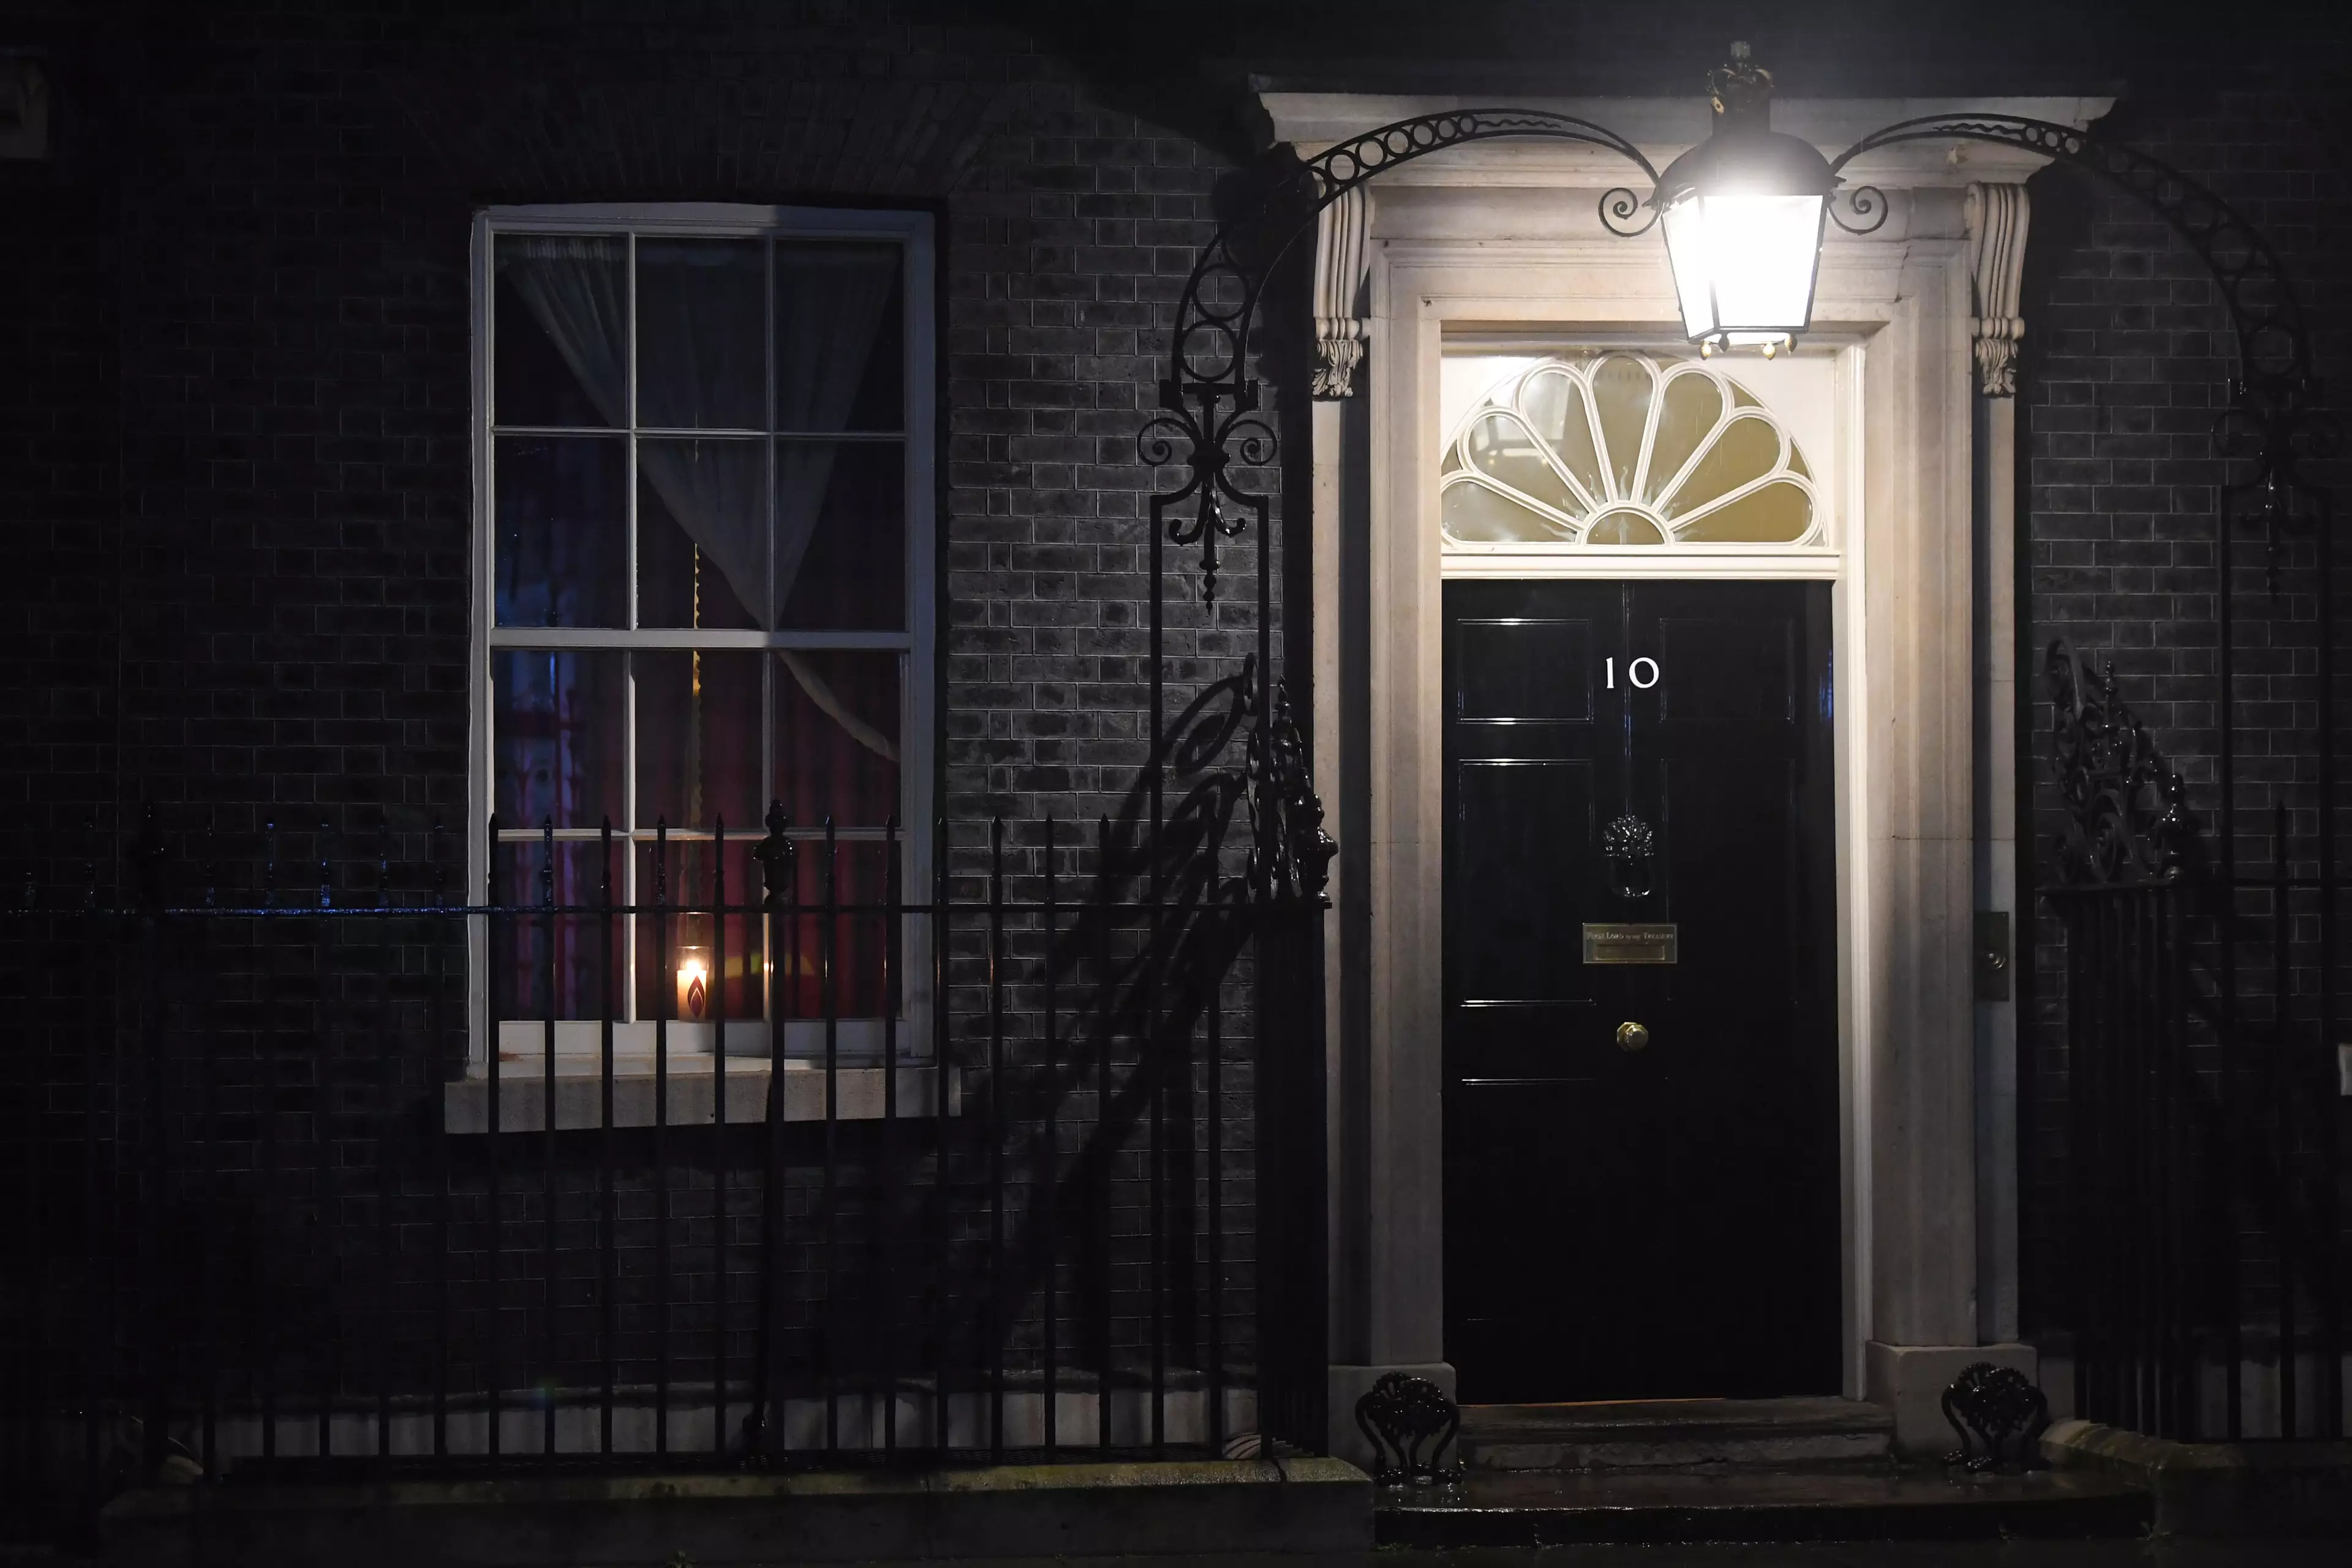 Downing Street has now removed the ad (